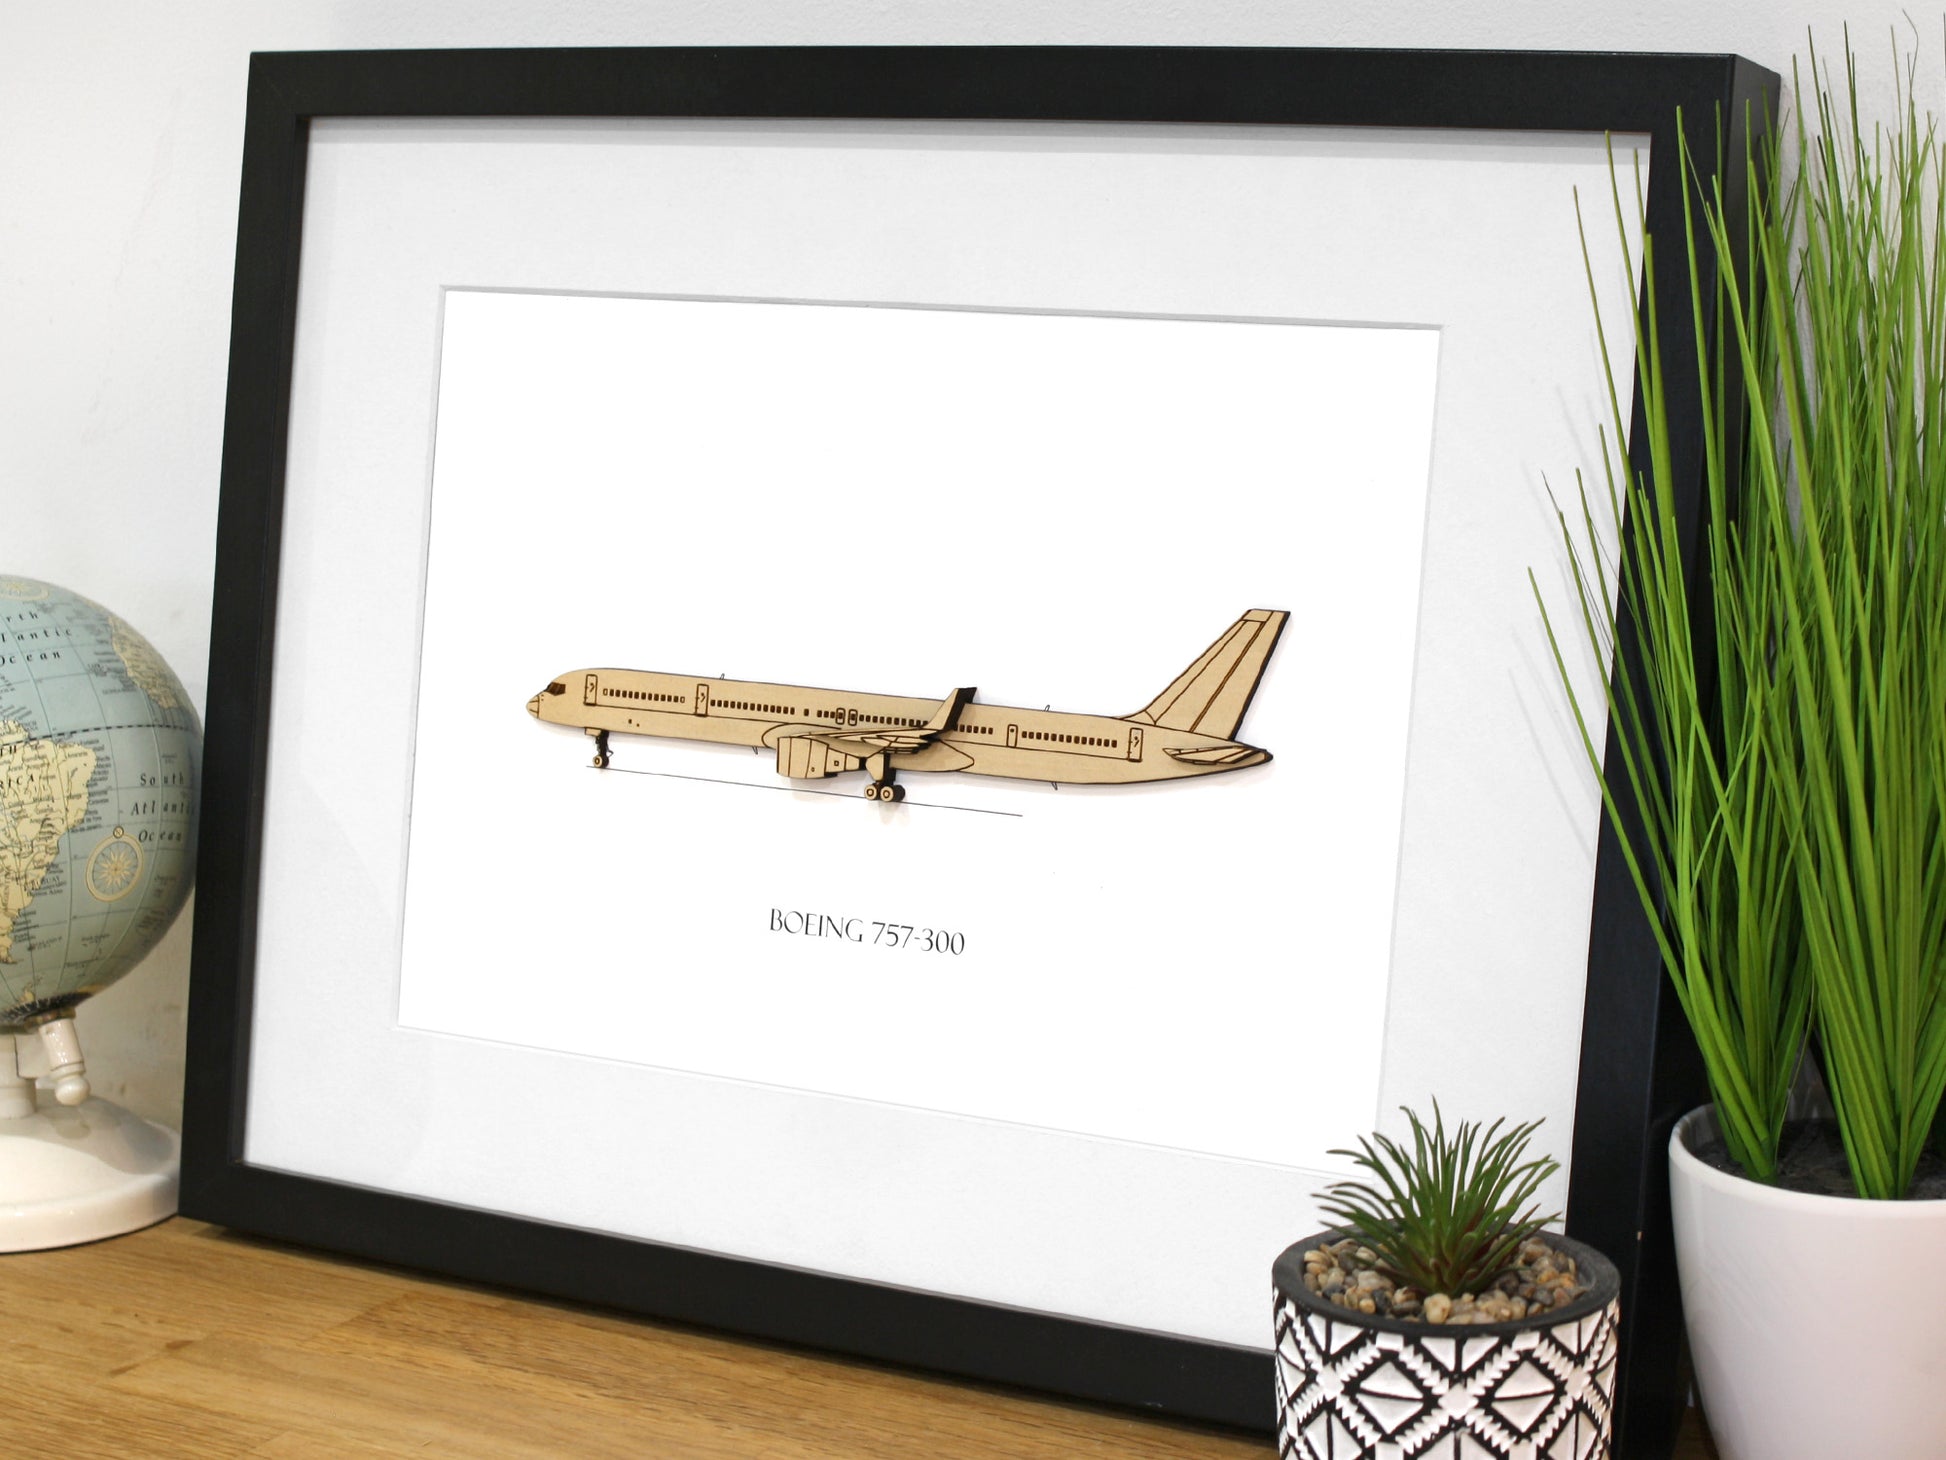 Boeing 757-300 pilot gifts